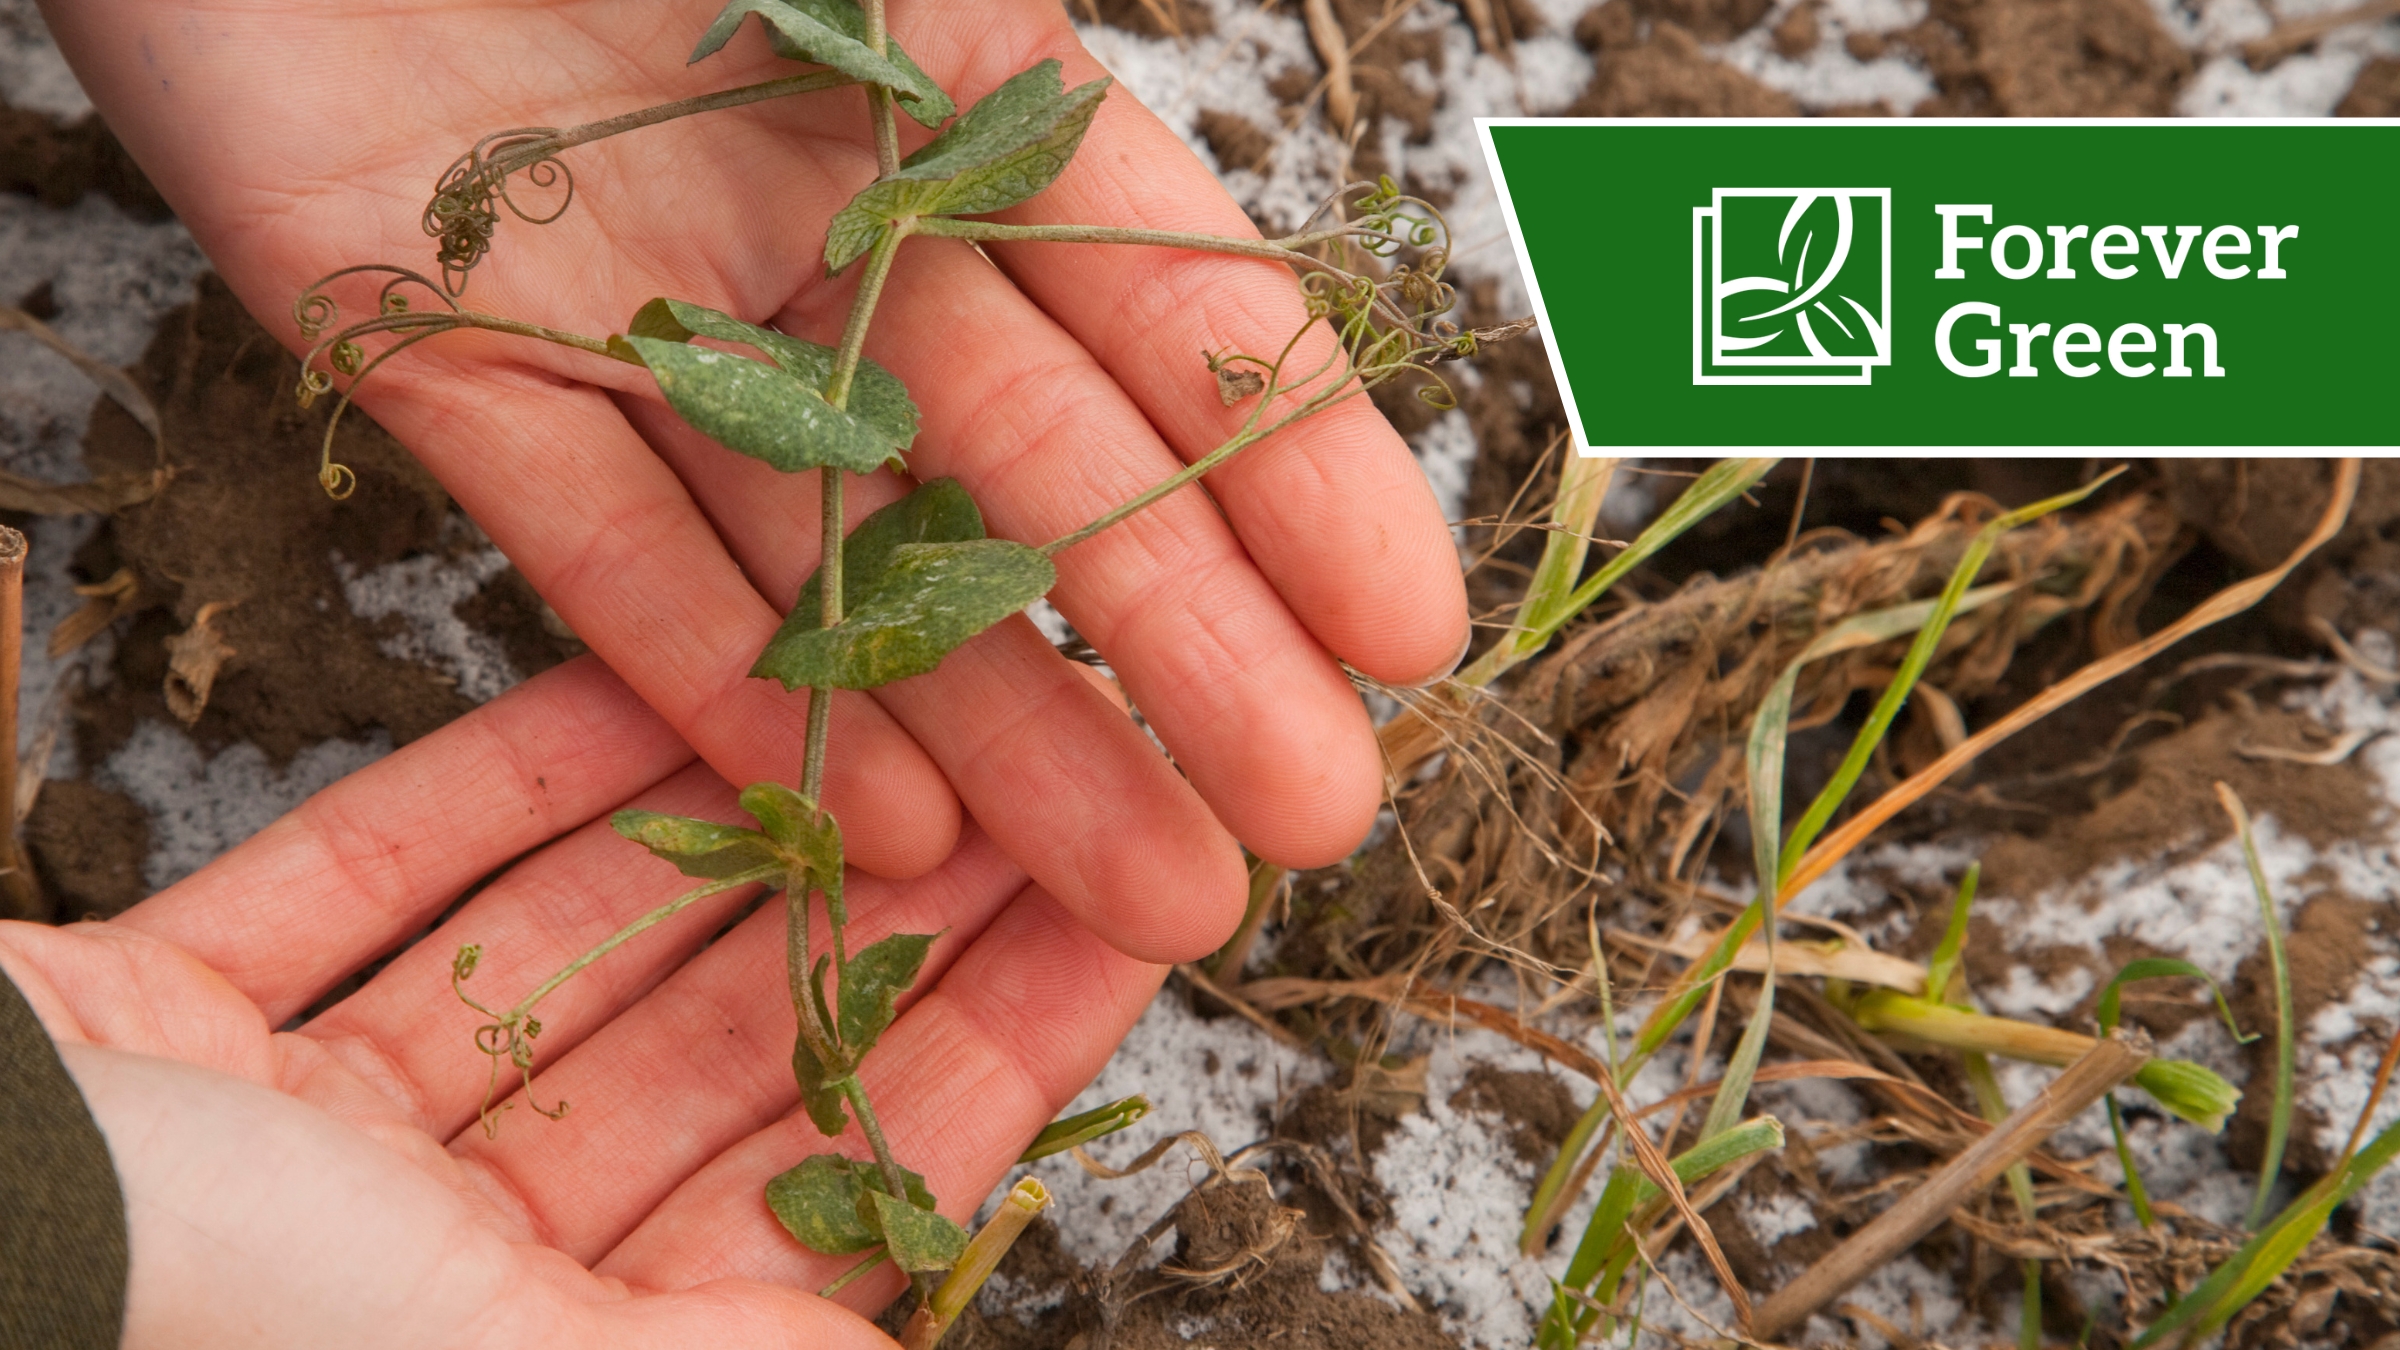 A pair of hands holding a growing pea plant. Snow can be seen on the soil in the background.